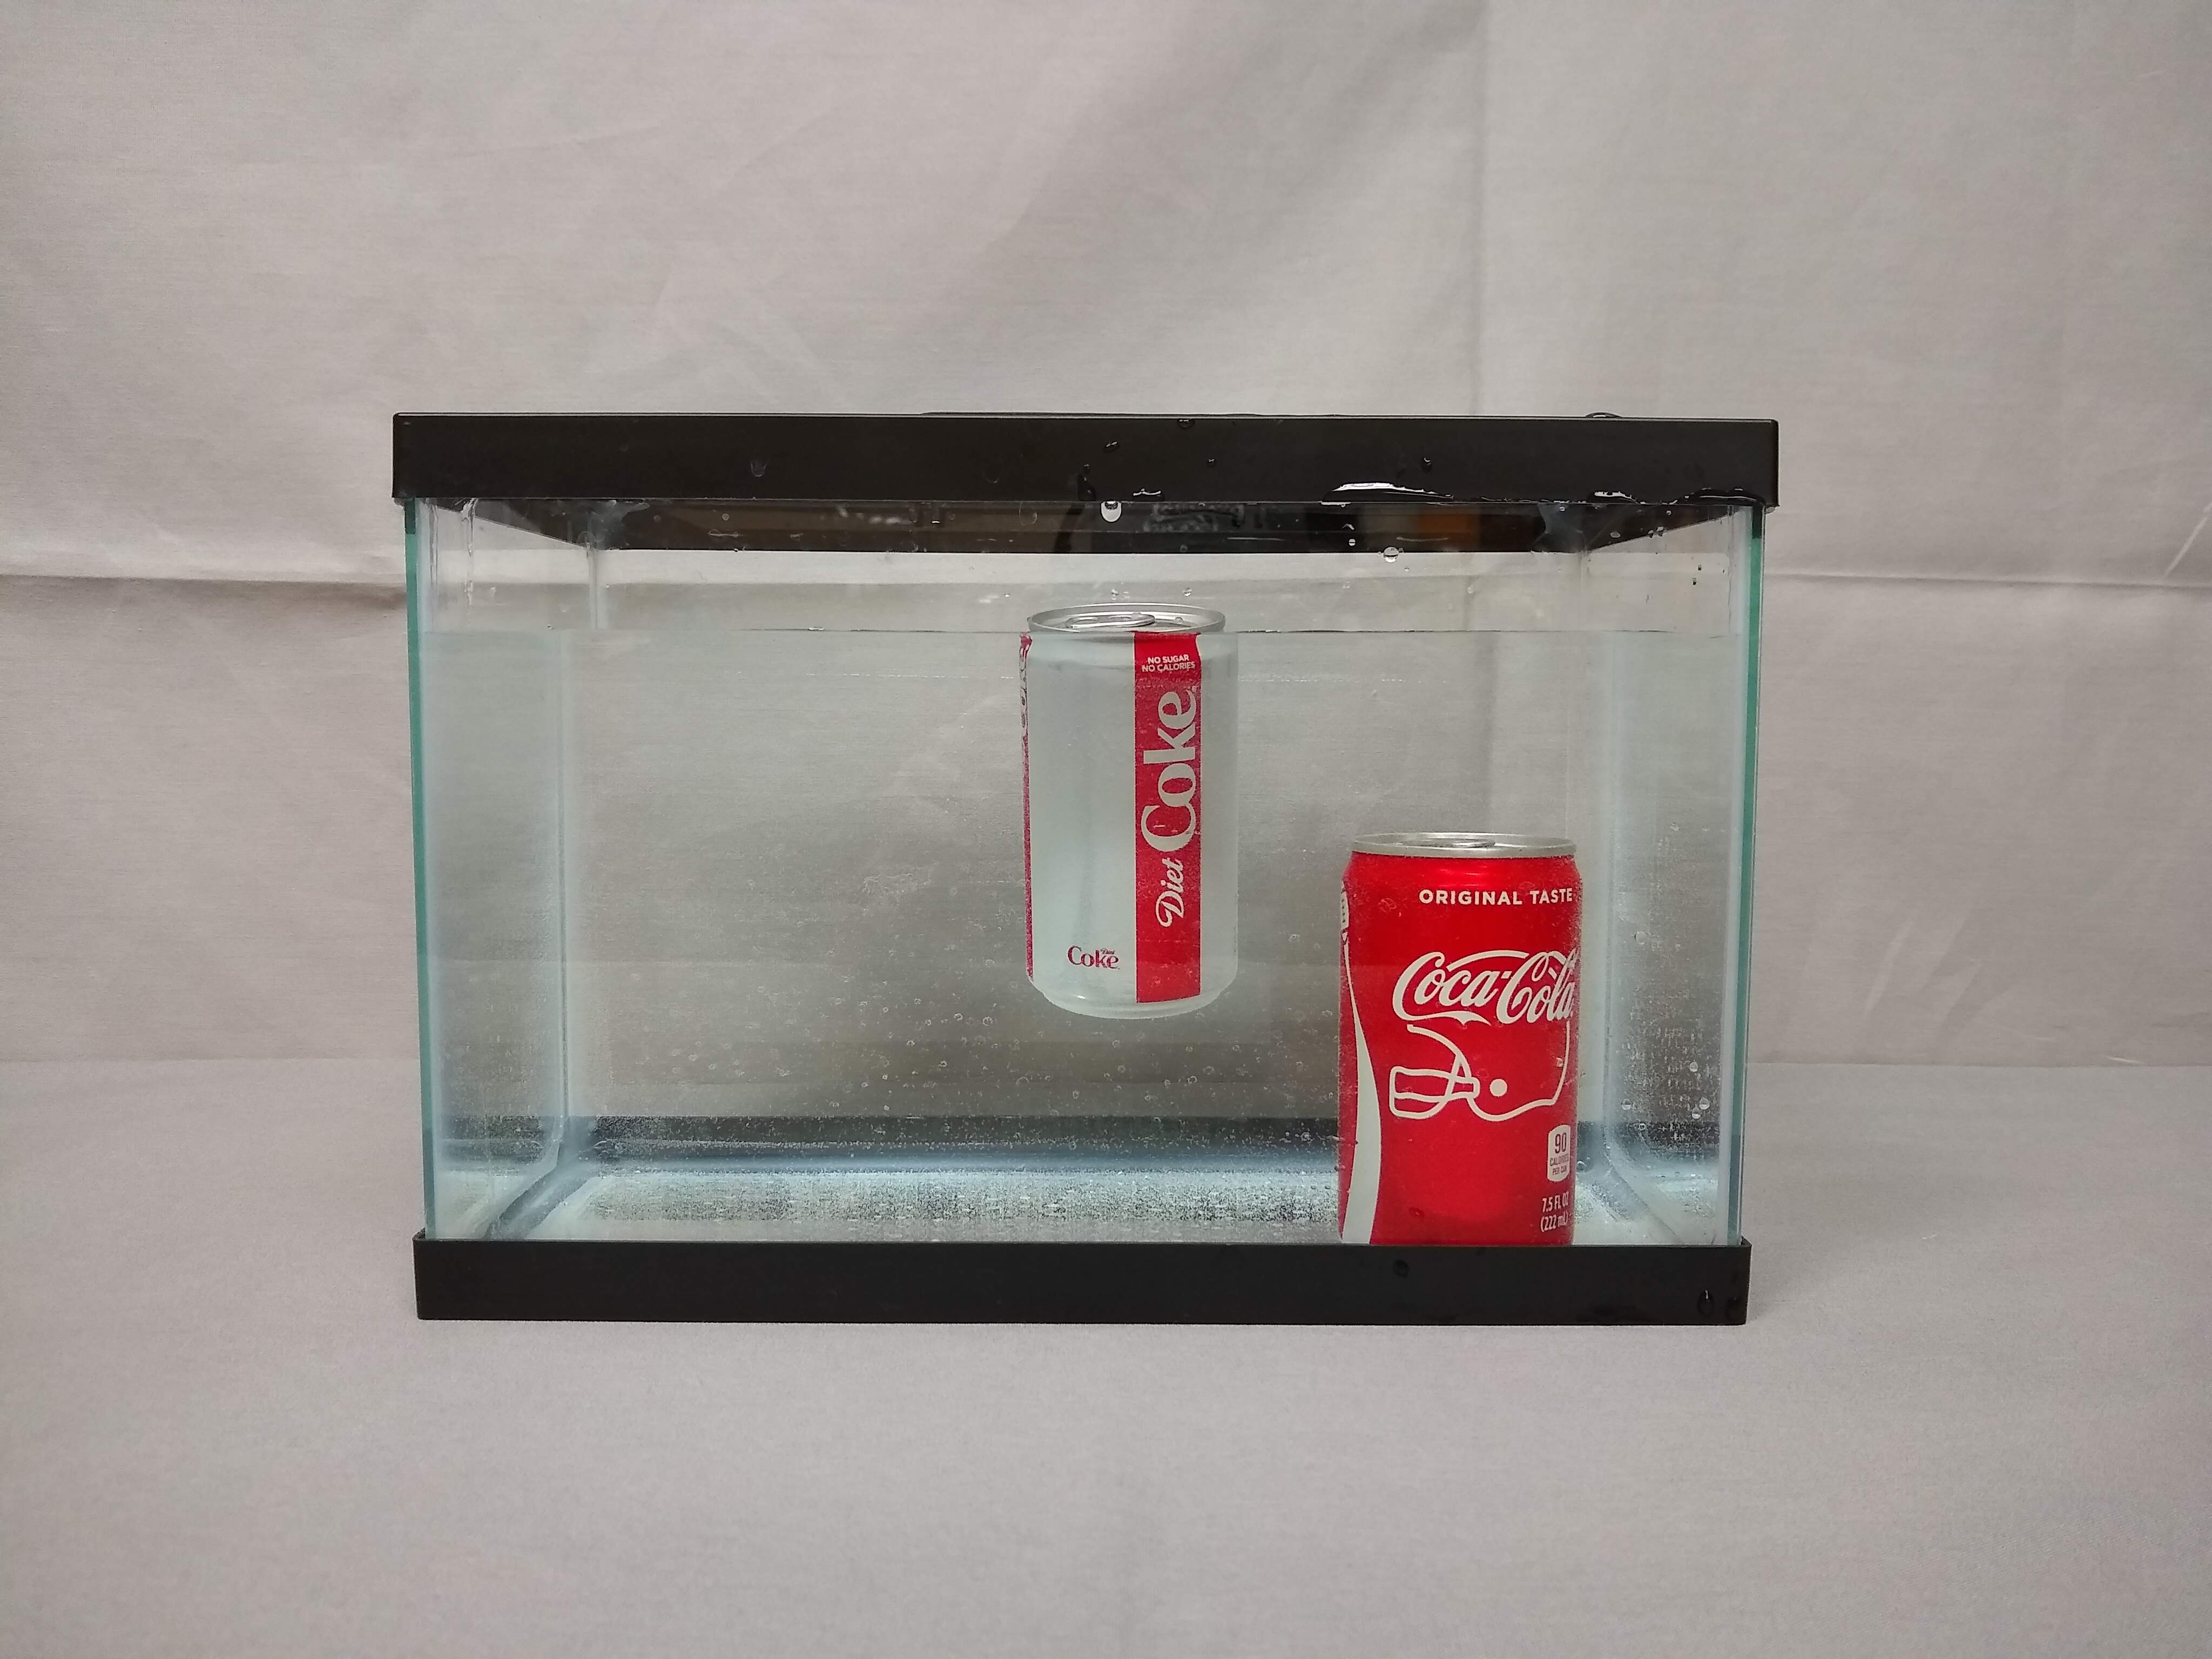 Diet Coke and Coke cans in water. 